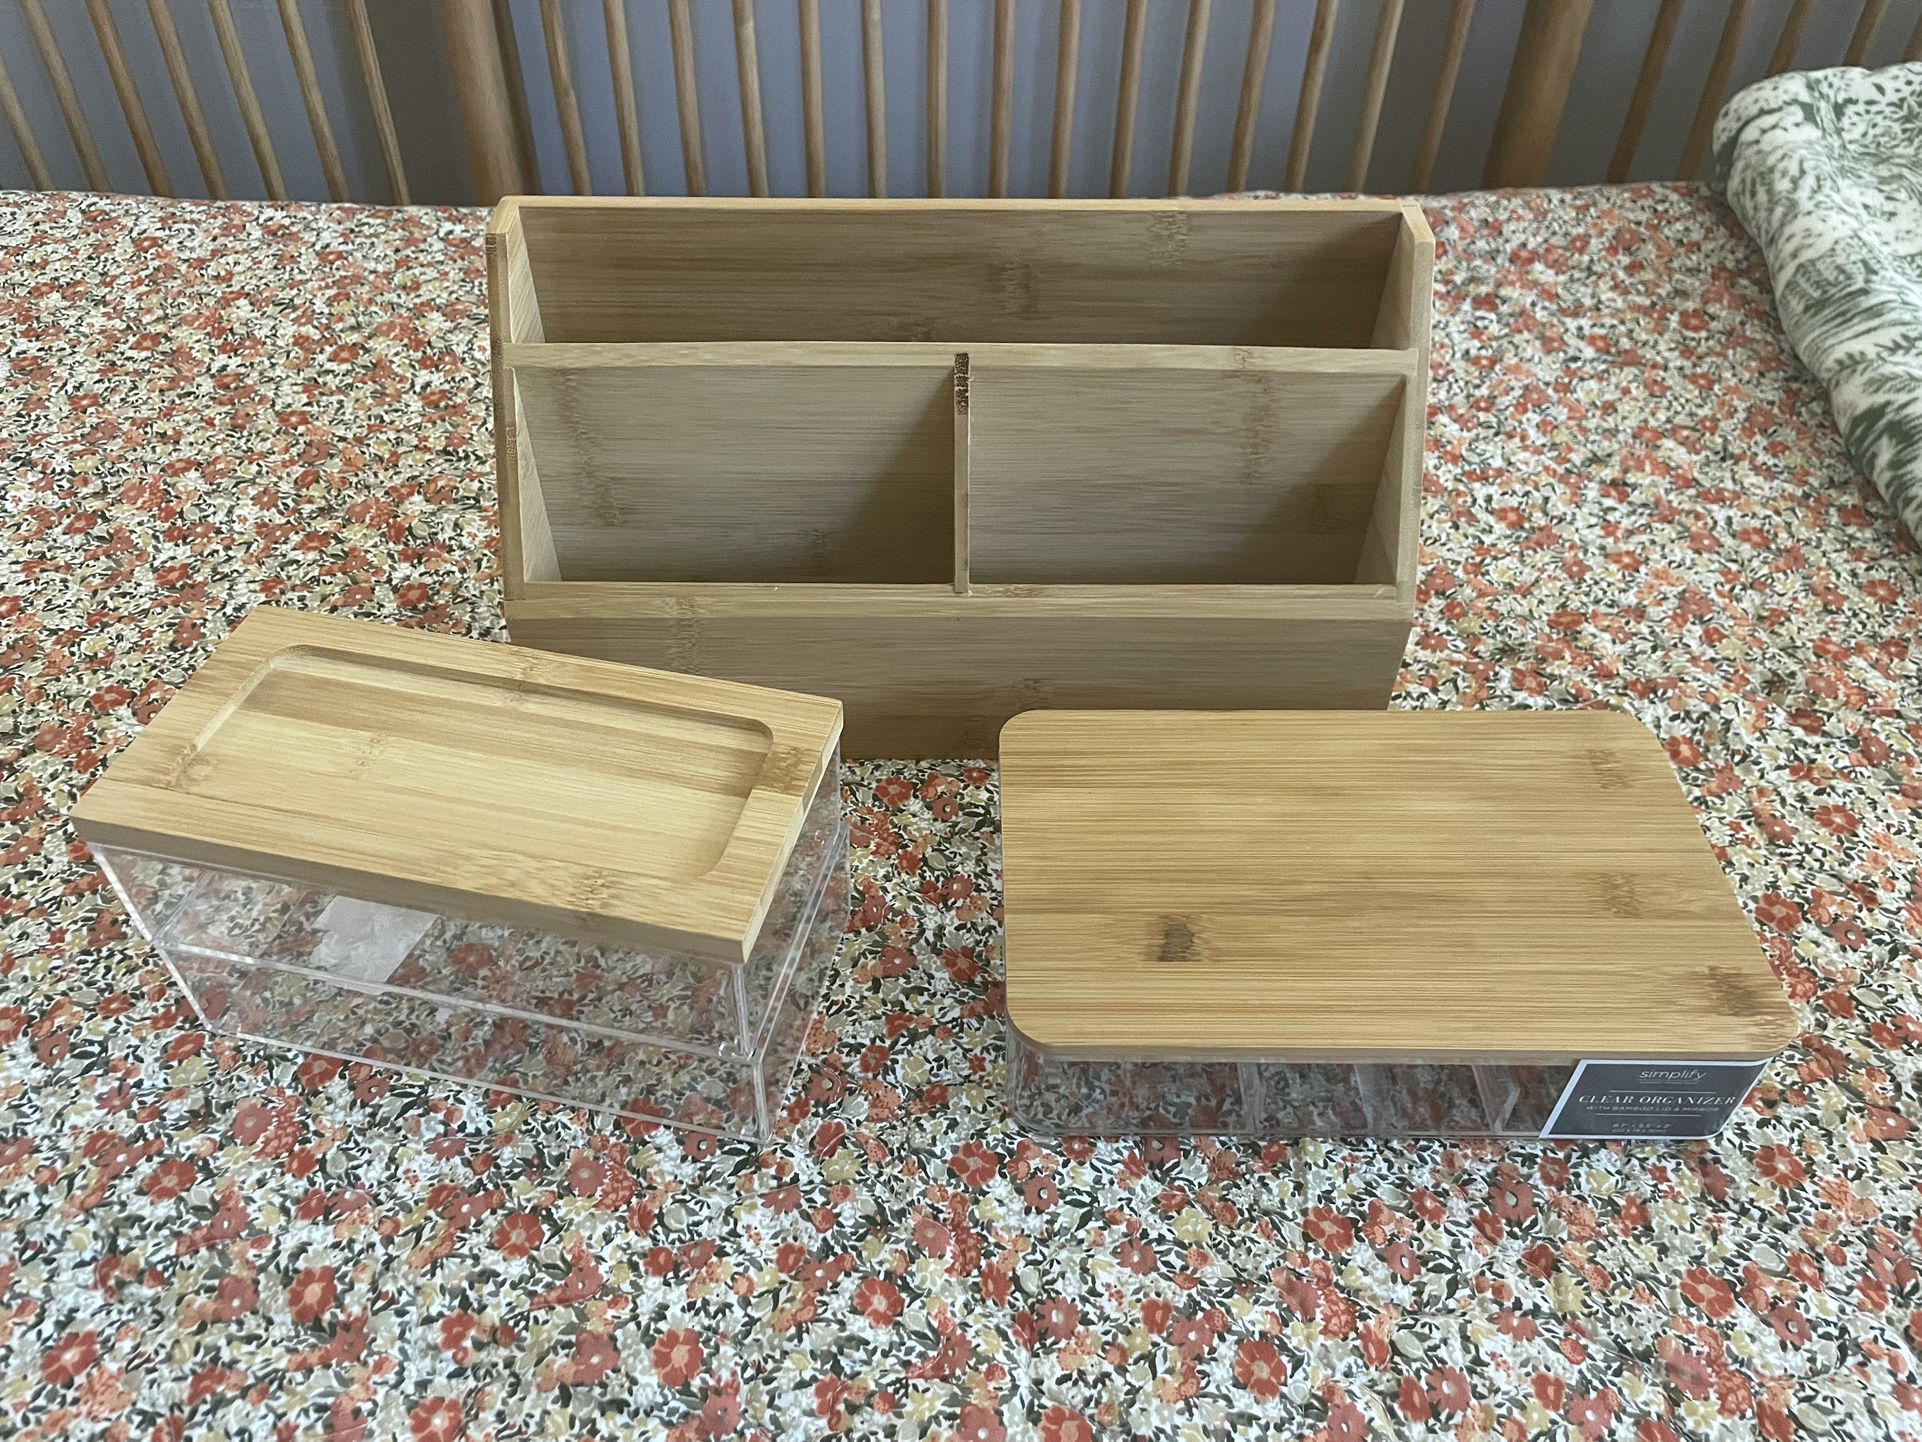 Set of 3 Boho Bamboo Lid Storage Containers/Boxes